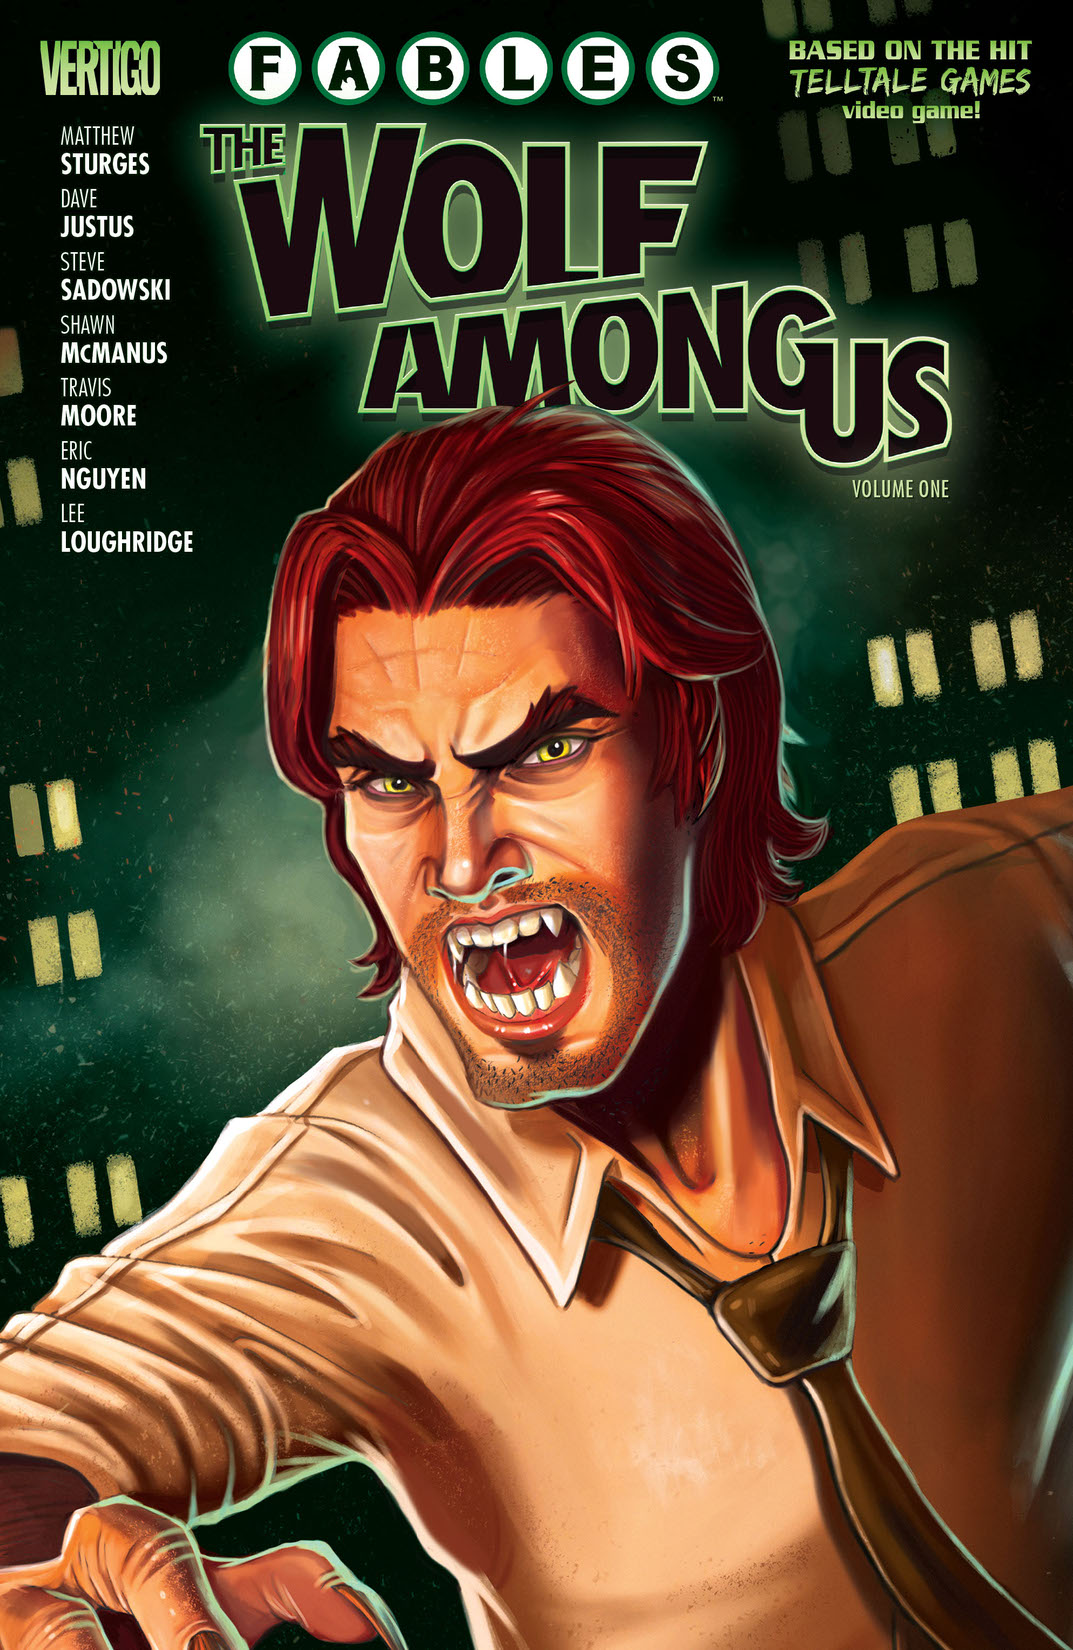 Fables: The Wolf Among Us Vol. 1 preview images